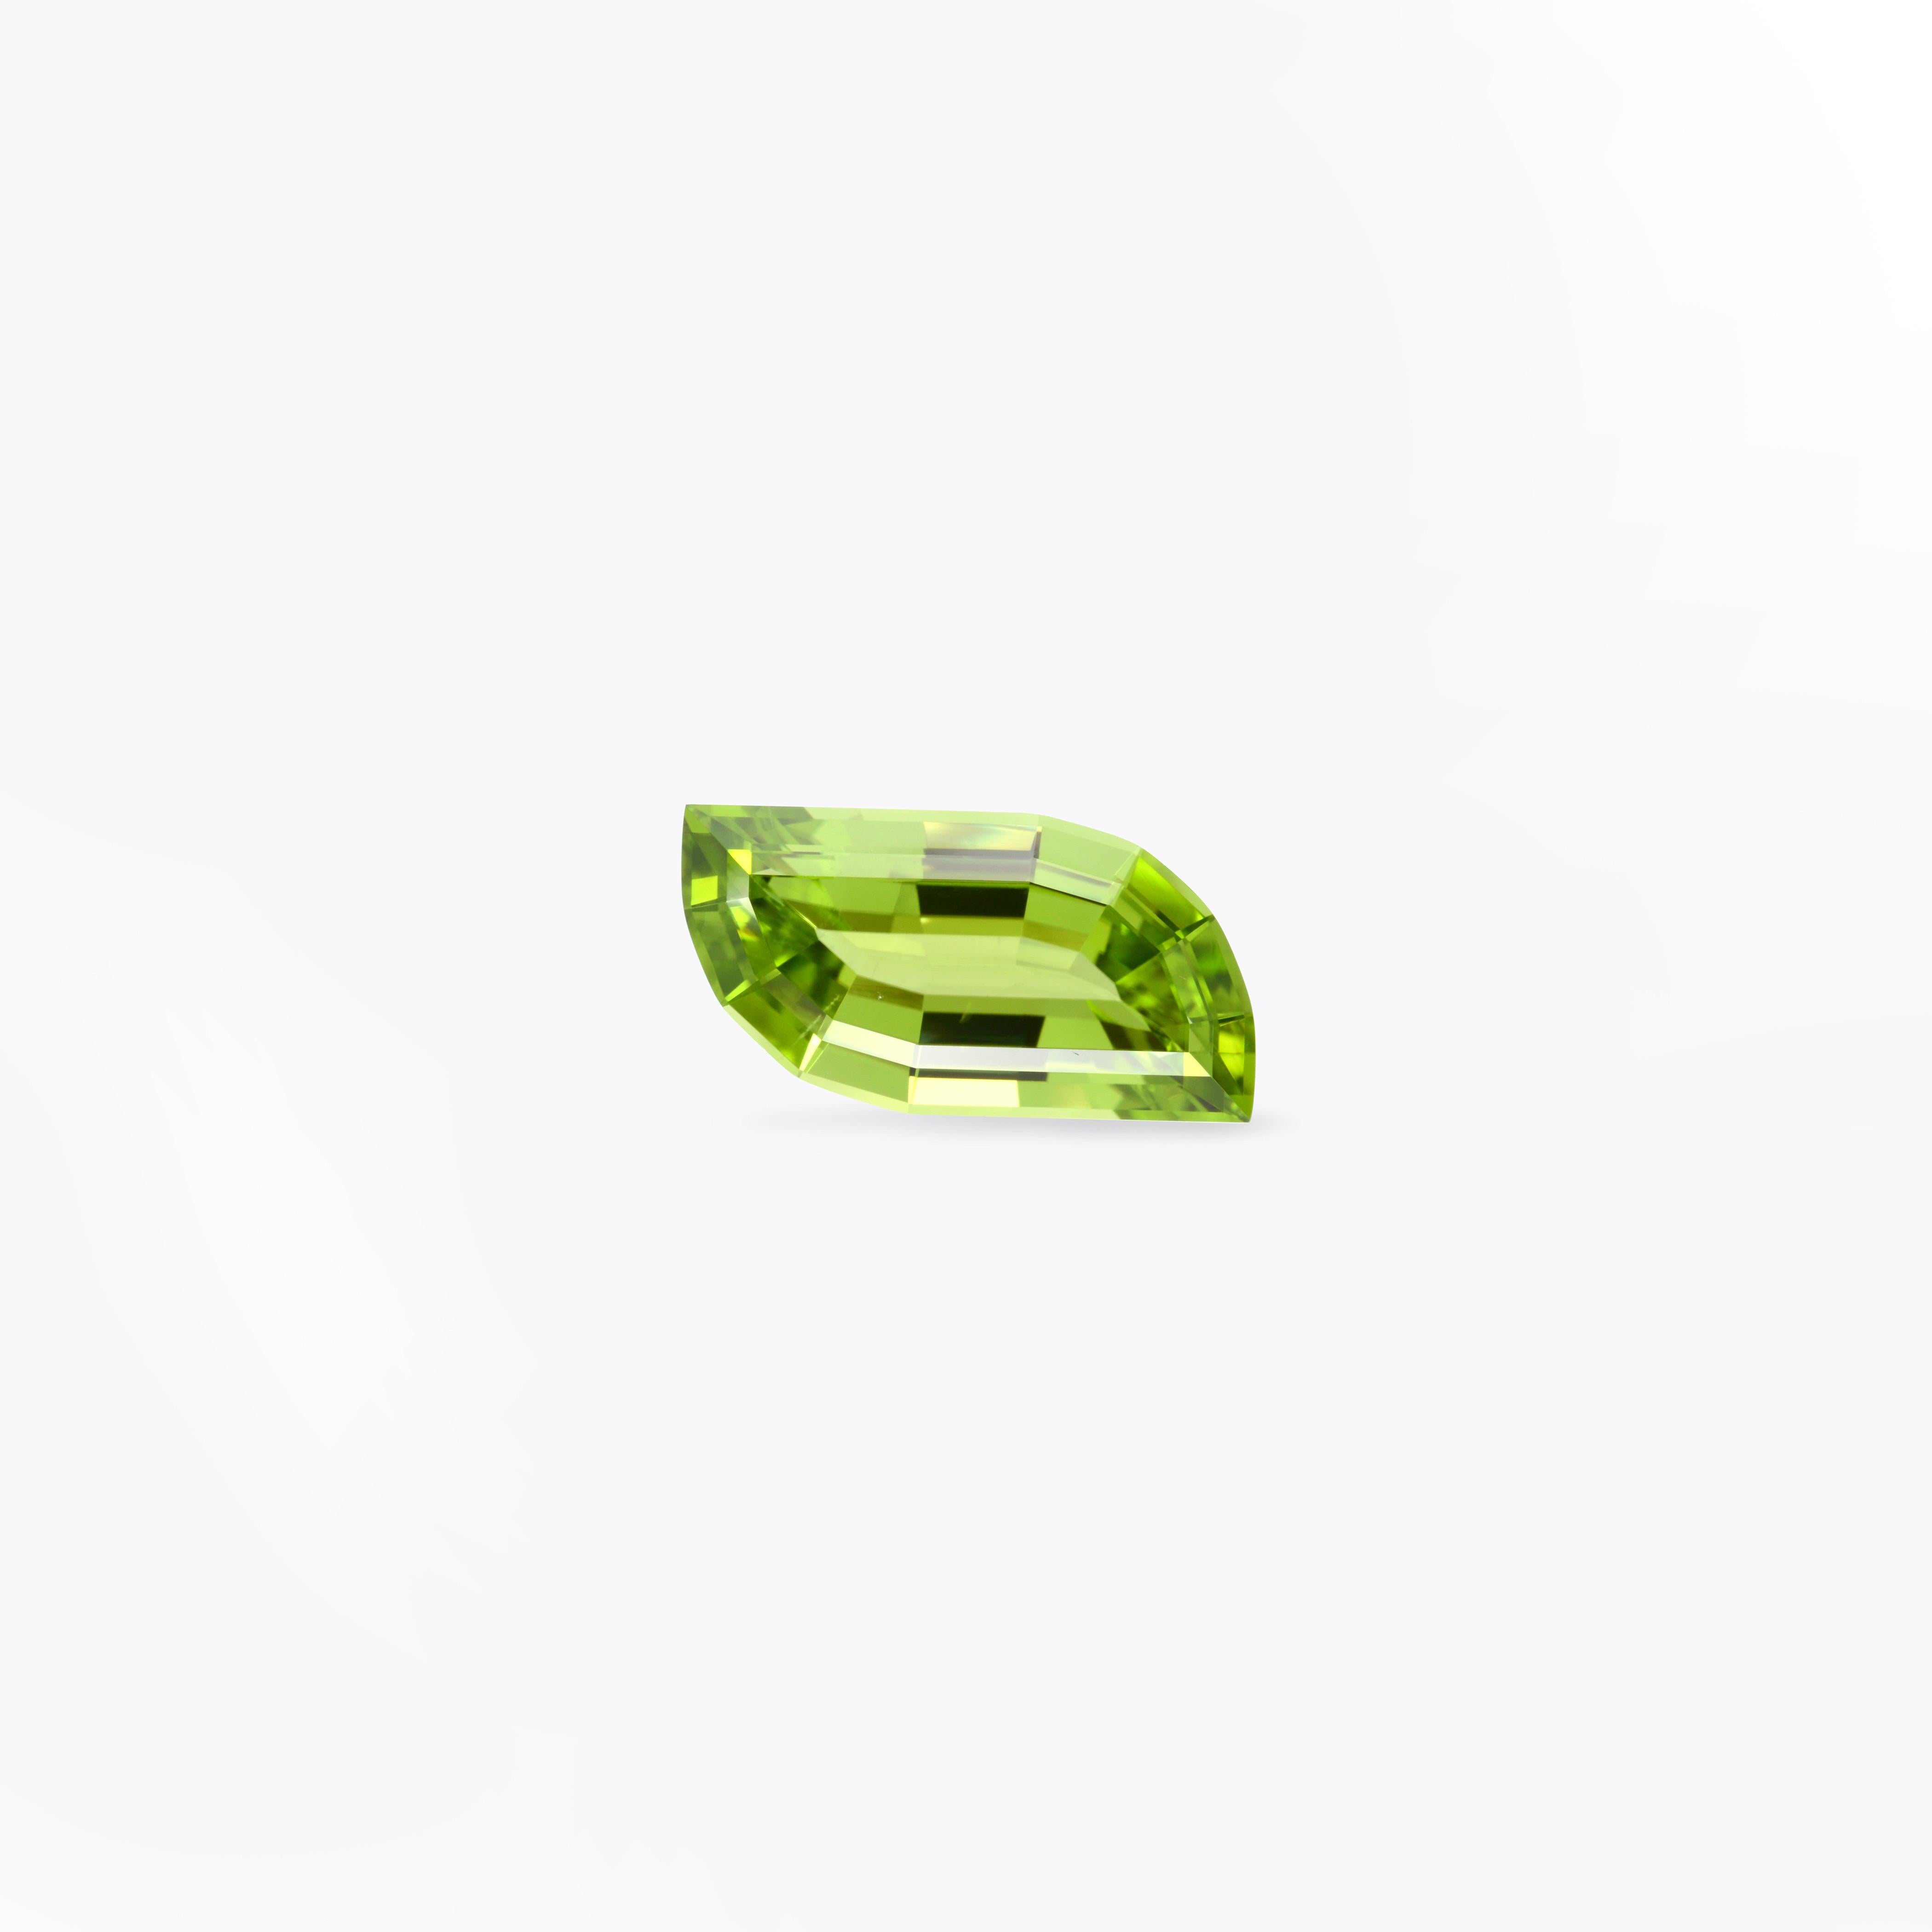 Exclusive 7.25 carat unmounted Peridot leaf-shaped gem, offered loose to a fine gemstone collector.
Returns are accepted and paid by us within 7 days of delivery.
We offer supreme custom jewelry work upon request. Please contact us for more